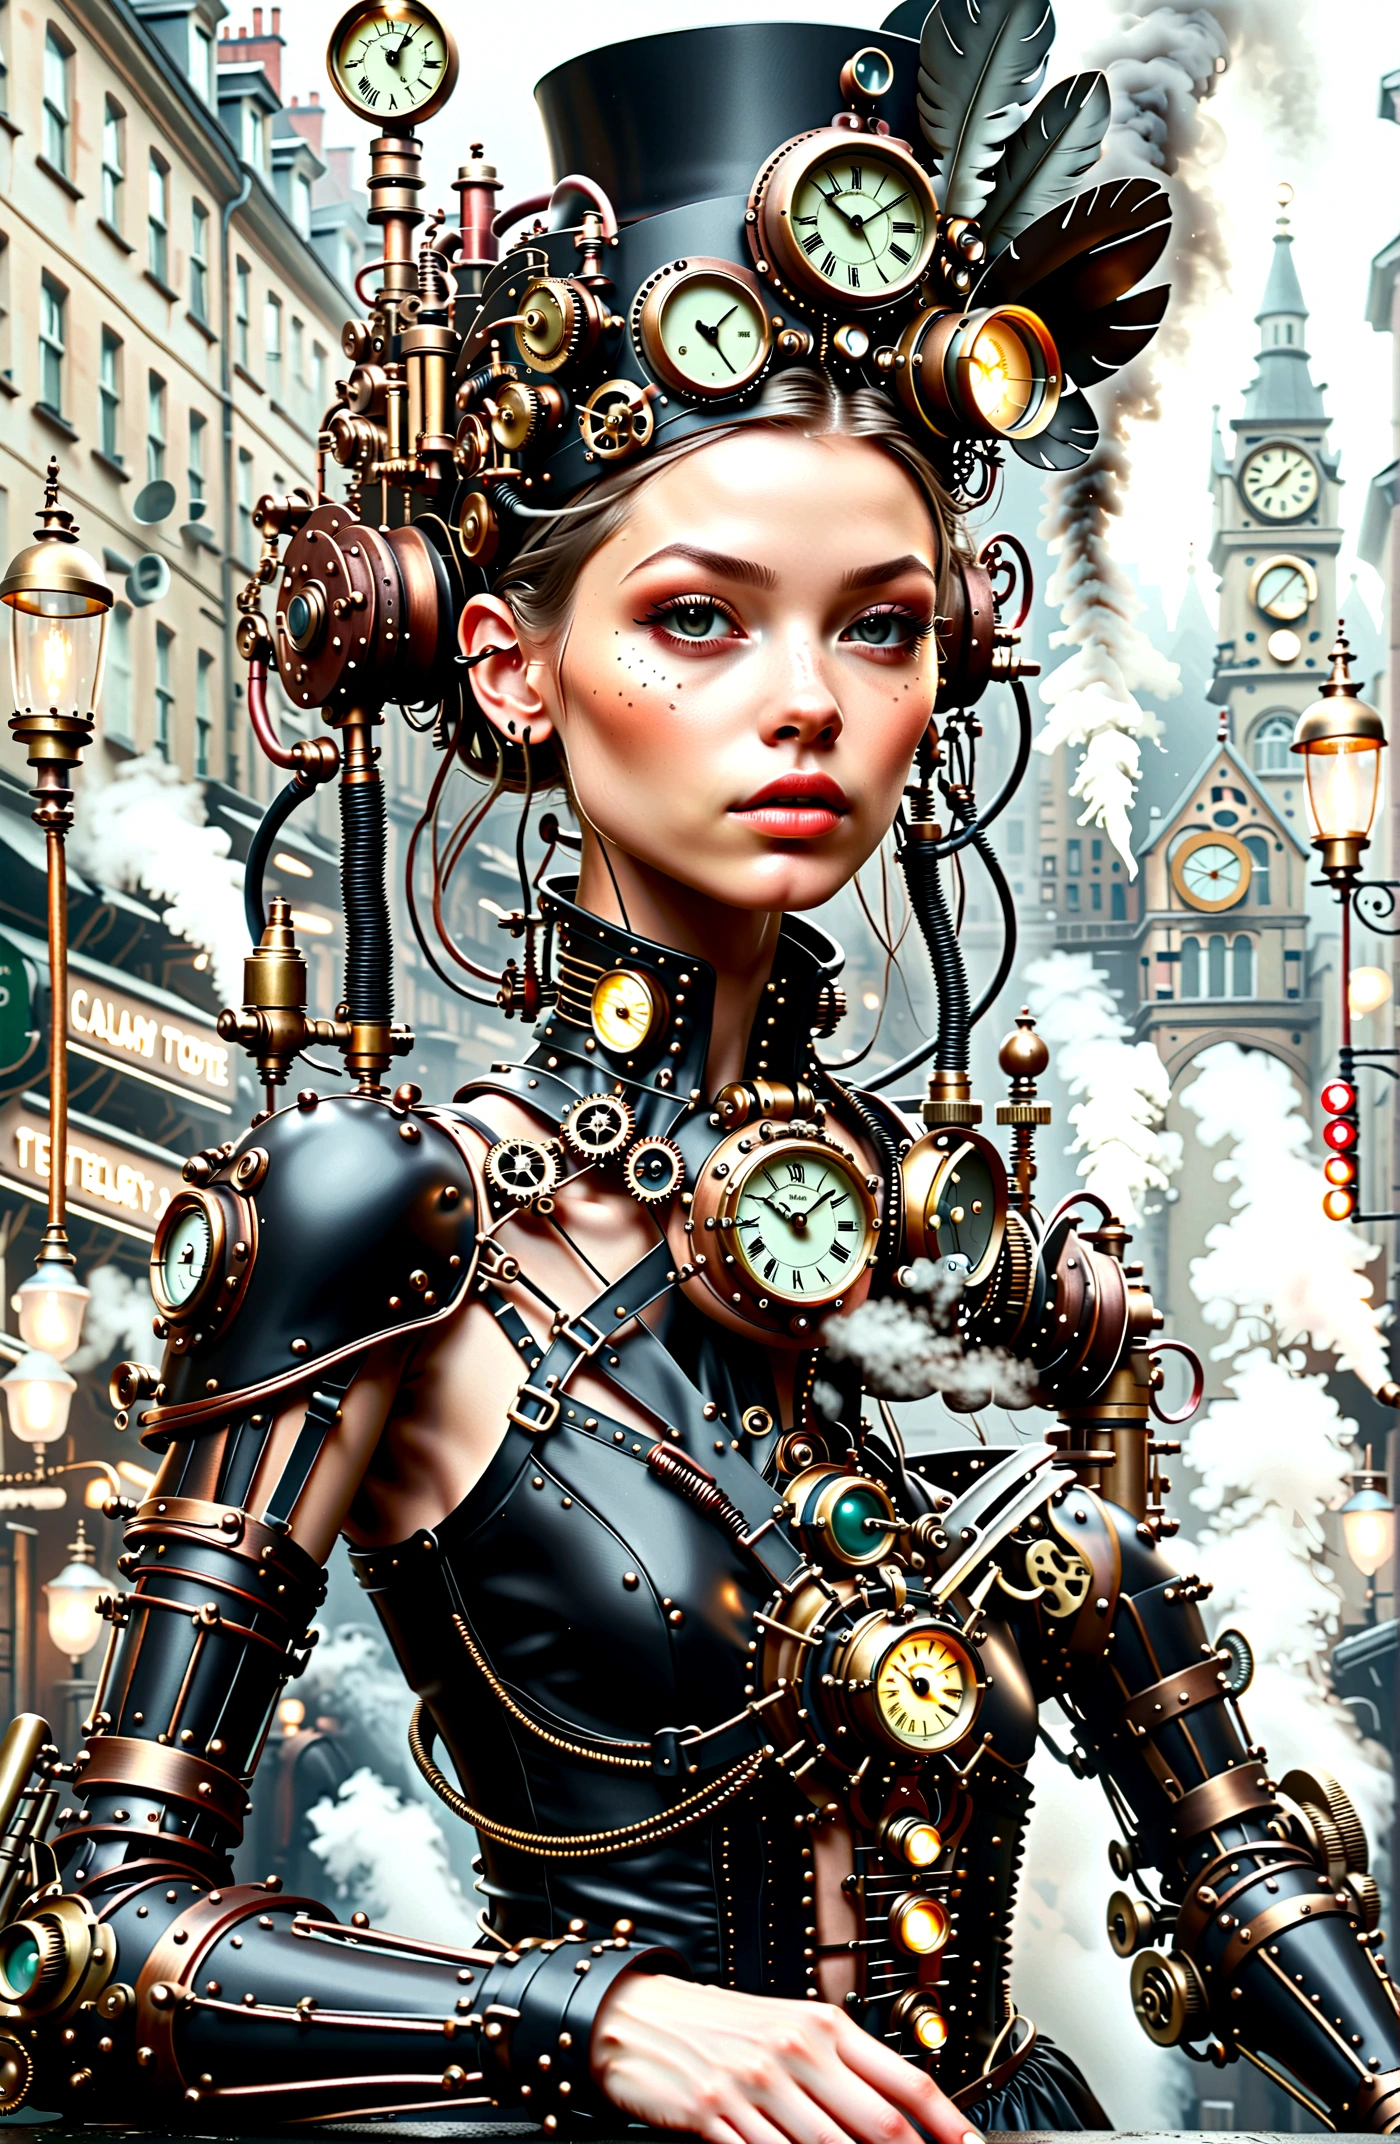 ((​masterpiece)), (best quality), (filmic),(Extreme detail CG Unity 8K wallpaper), 1 girl, fit,Delicious company, small breasts,(no protective goggles on the face)(very long silver hair),a stunning red-haired steampunk woman, who lost her forearm in an accident, received as a replacement a beautifully designed, fine and perfectly fitting robotic prosthesis(steampunk style)poses cool in front of machines and factories. with this prosthesis she shows us a sealed, delicate poison glass bottle with blue liquid in it in. Hand-forearm prosthesis made of brass and leather. She wears tight-fitting clothes ( steampunk pilot suit with cut-outs and buckles).Leather and decorative goggles on the head, also made of brass and leather. The landscape is a bit gloomy, but also impressive.,1 line drawing,the picture,steampunk style
